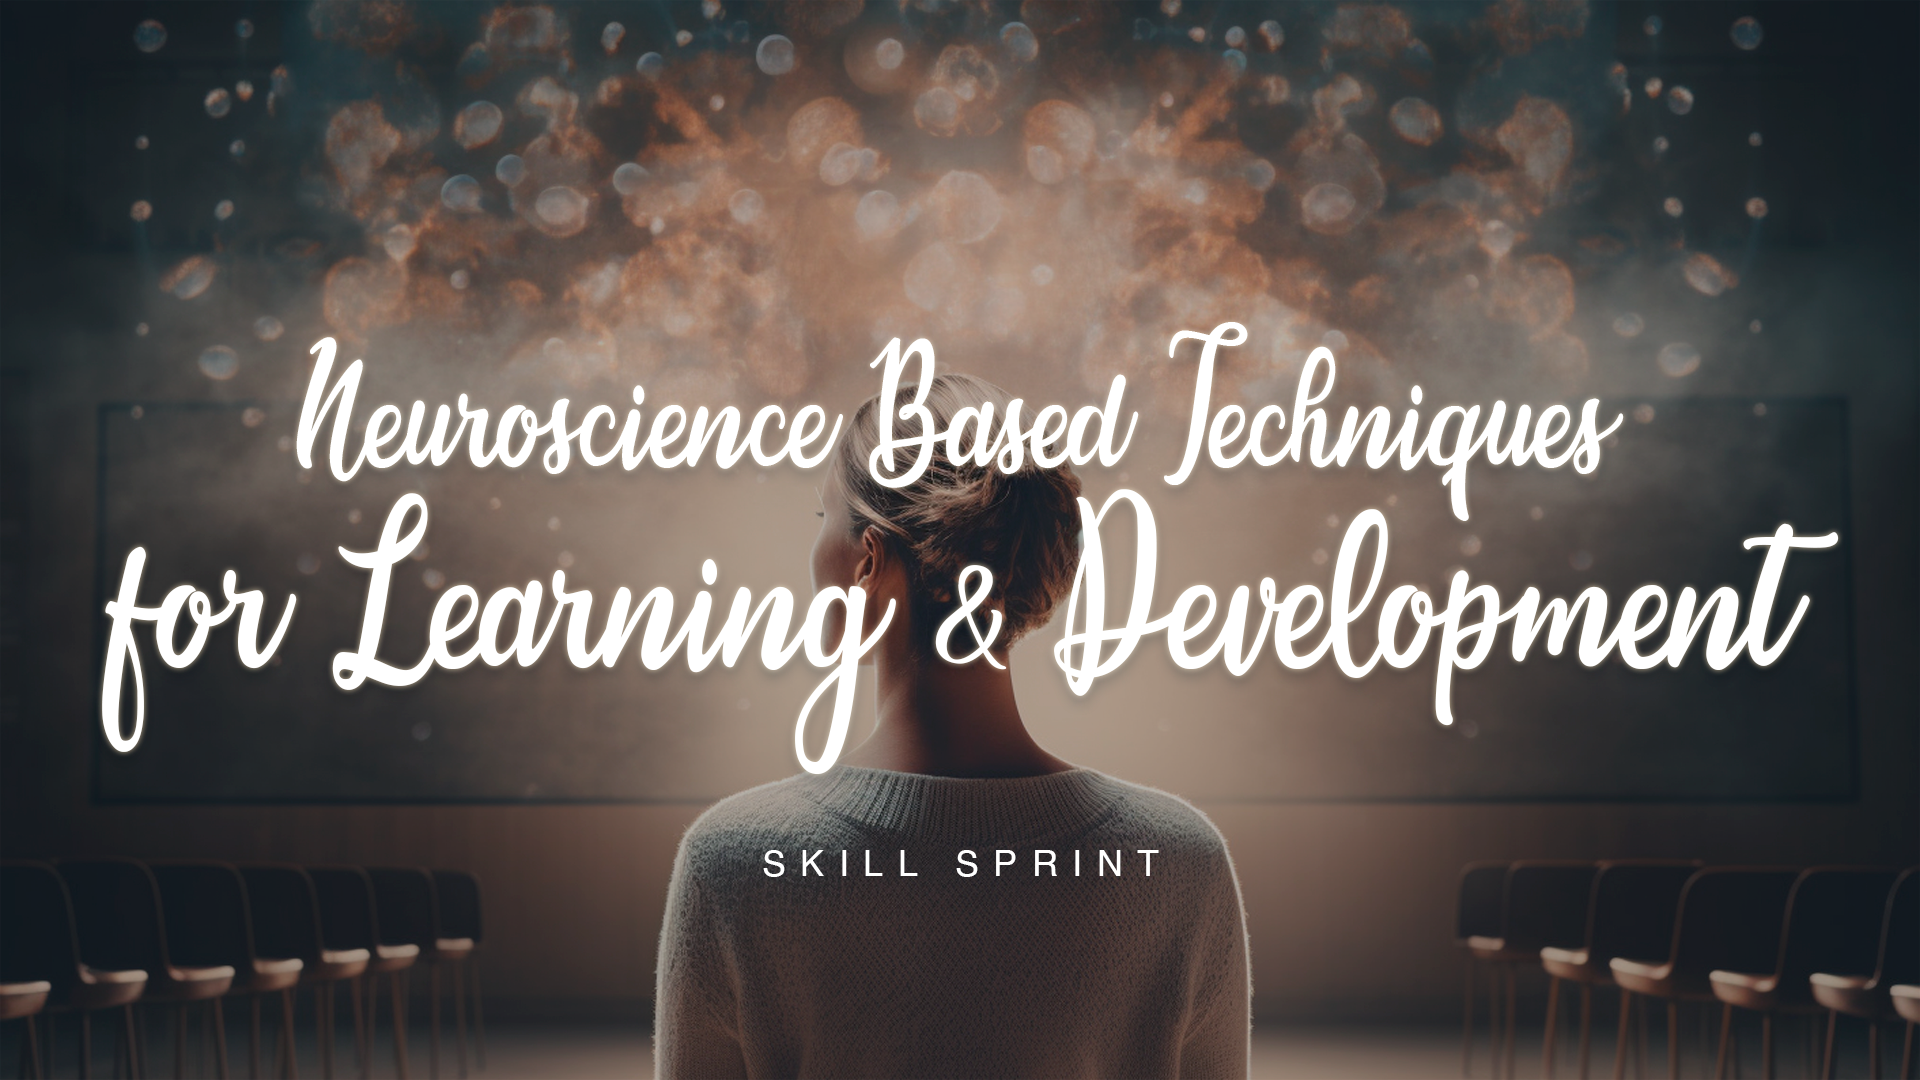 Neuroscience Based Techniques for Learning and Development